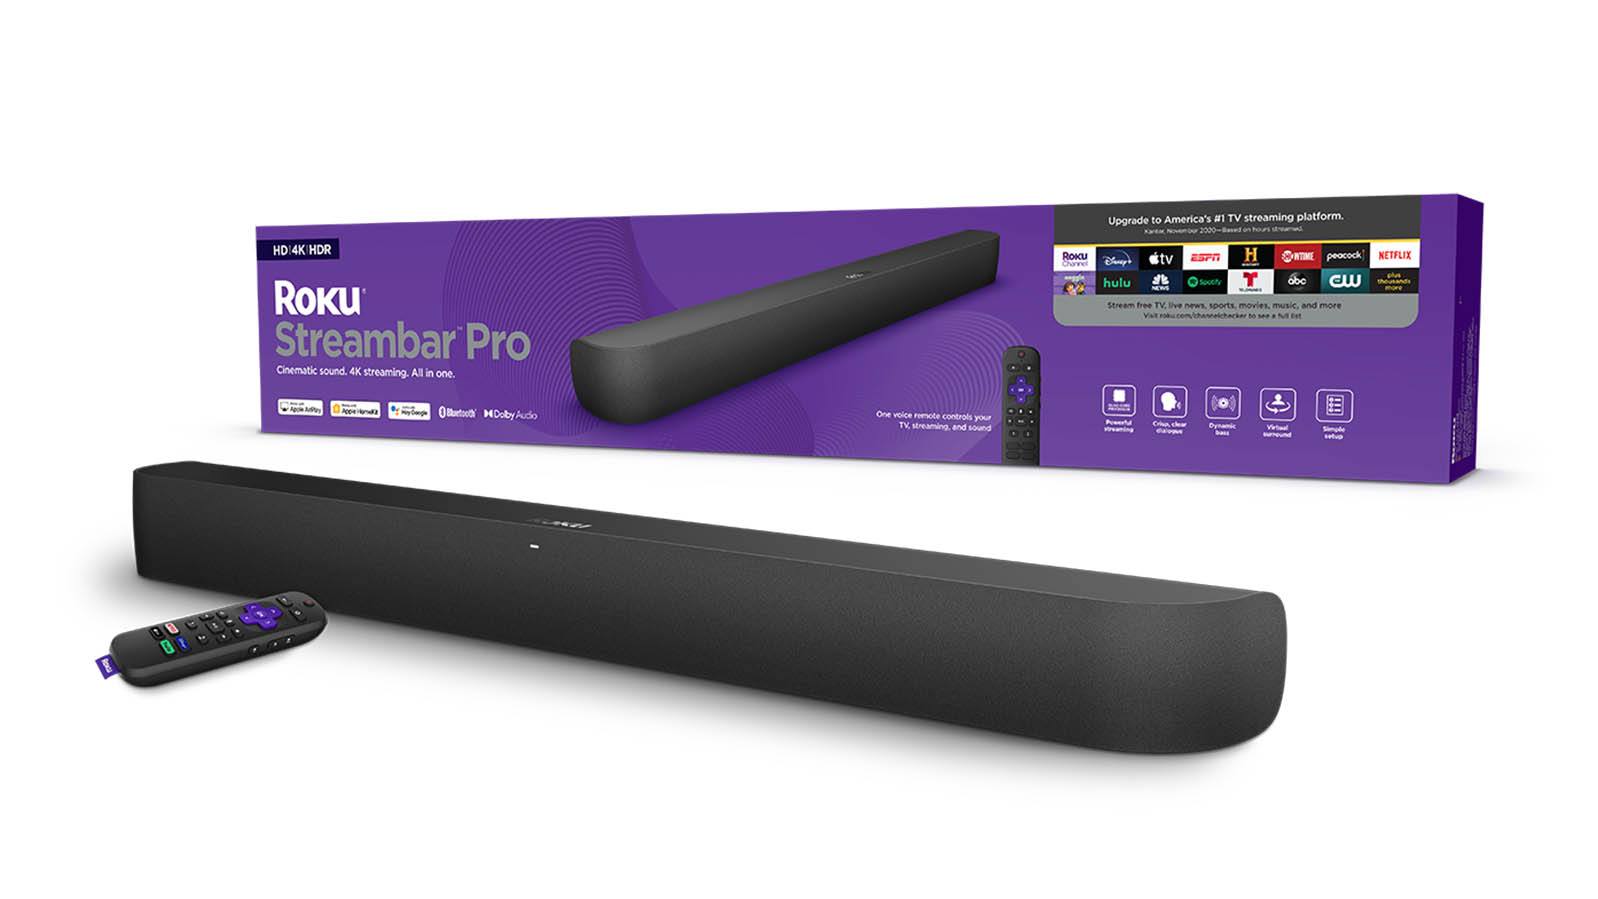 Roku’s Streambar Pro is At Its Lowest Price Ever